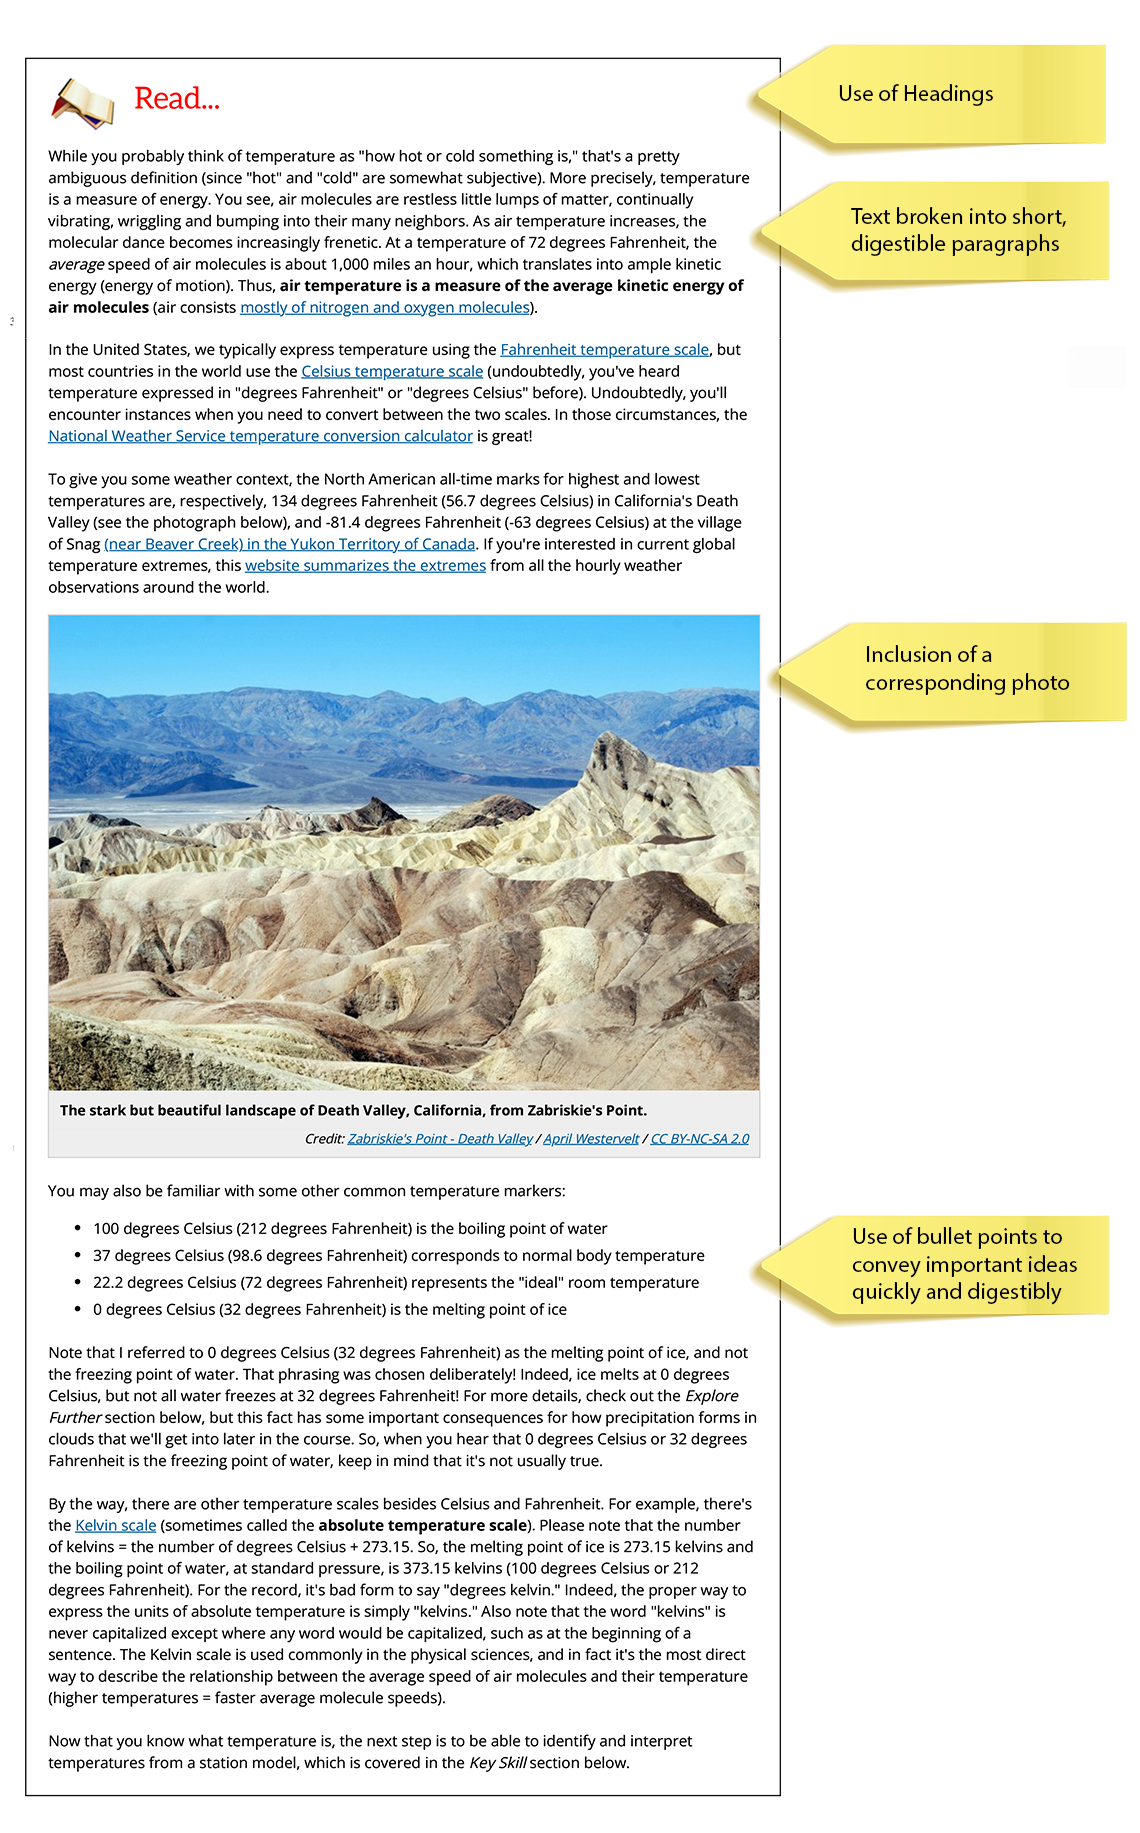 Page of lesson content using headings, short paragraphs, images, and bulleted lists